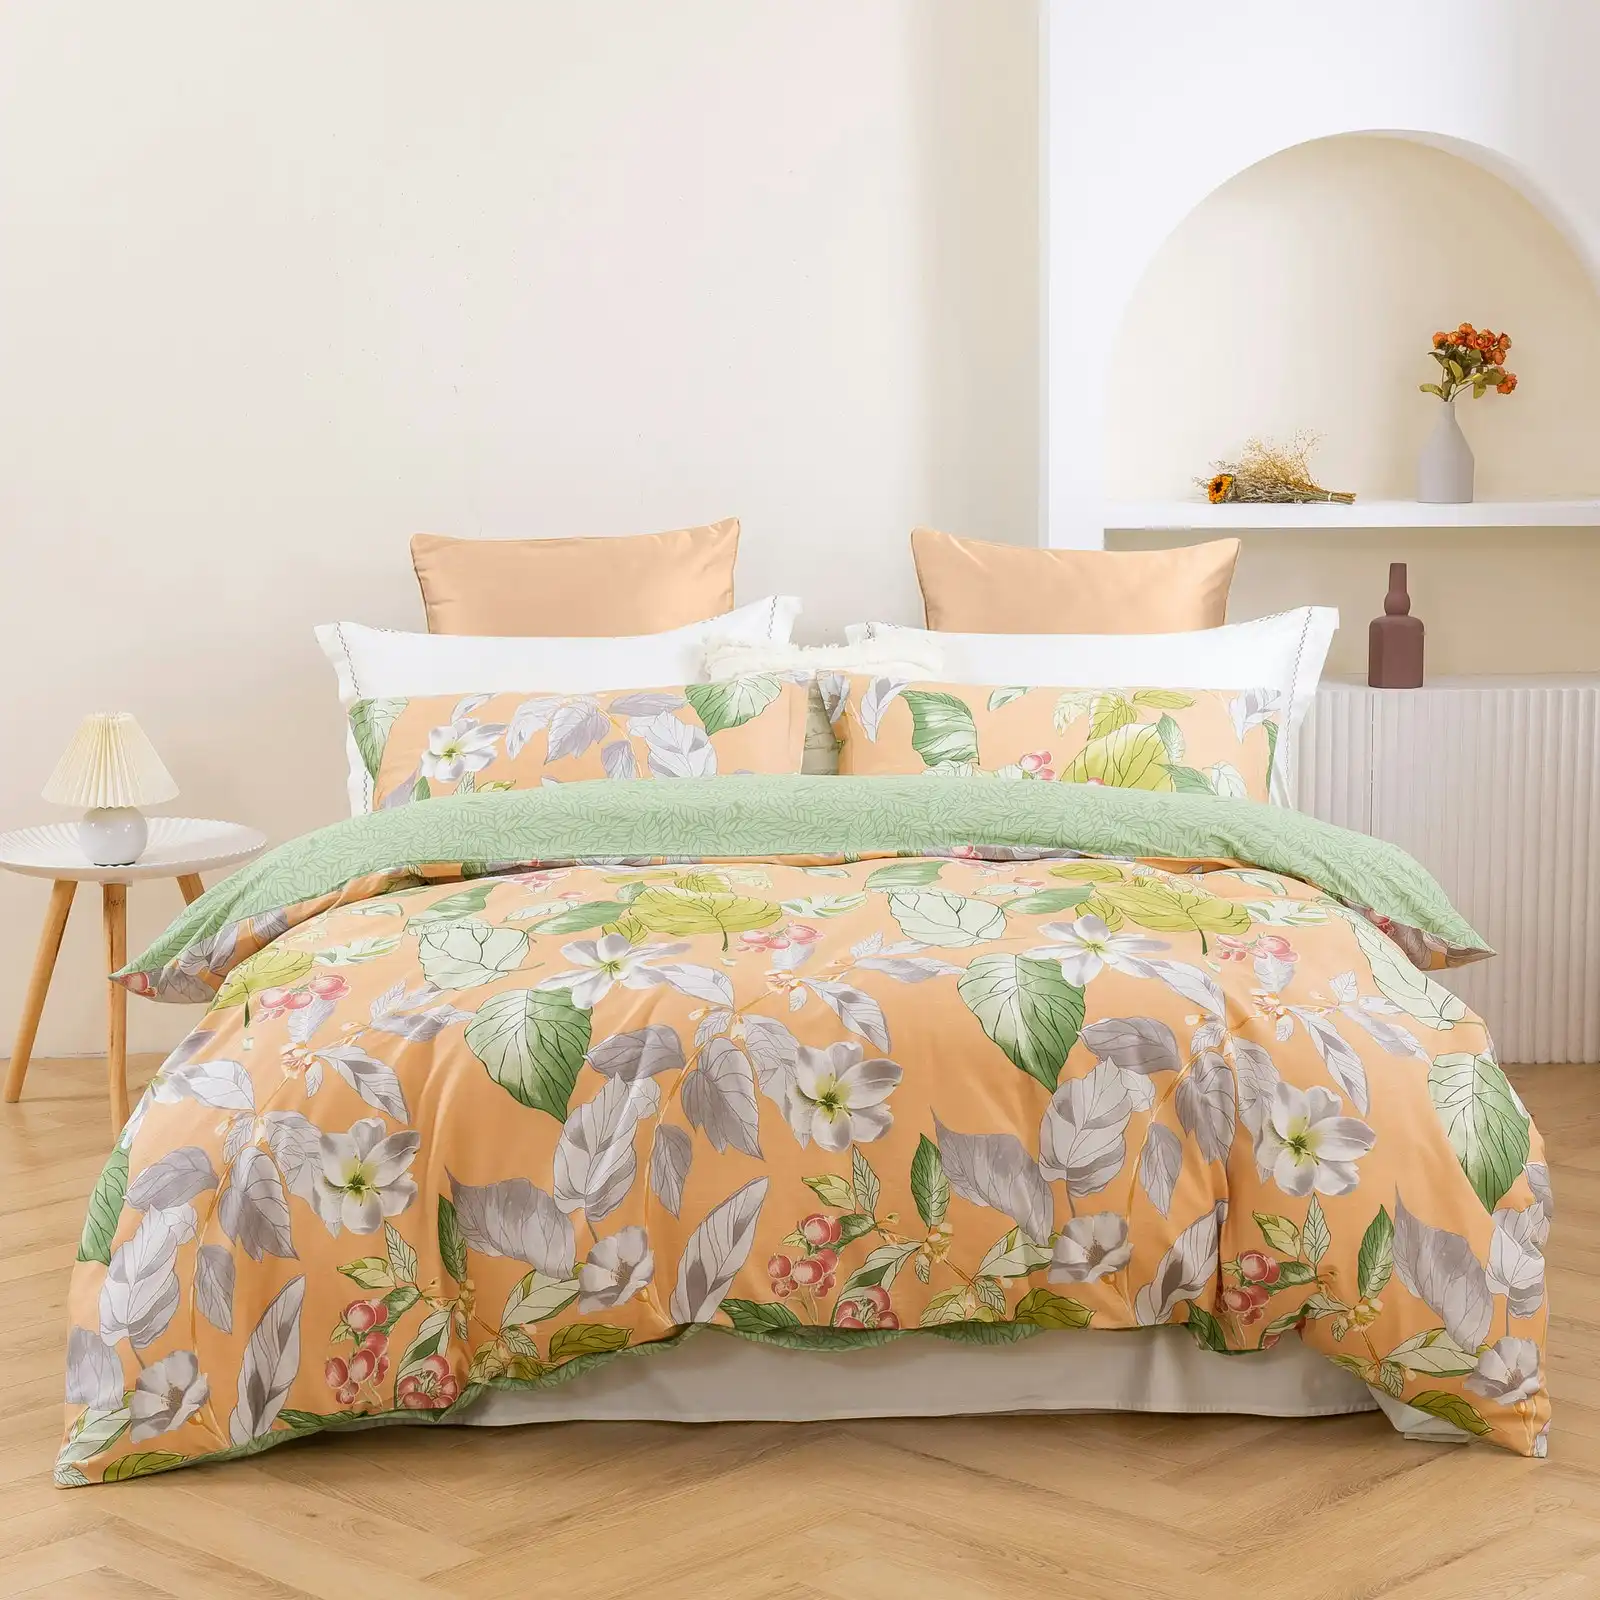 Dreamaker Peach Lily 100% Cotton Reversible Quilt Cover Set King Single Bed